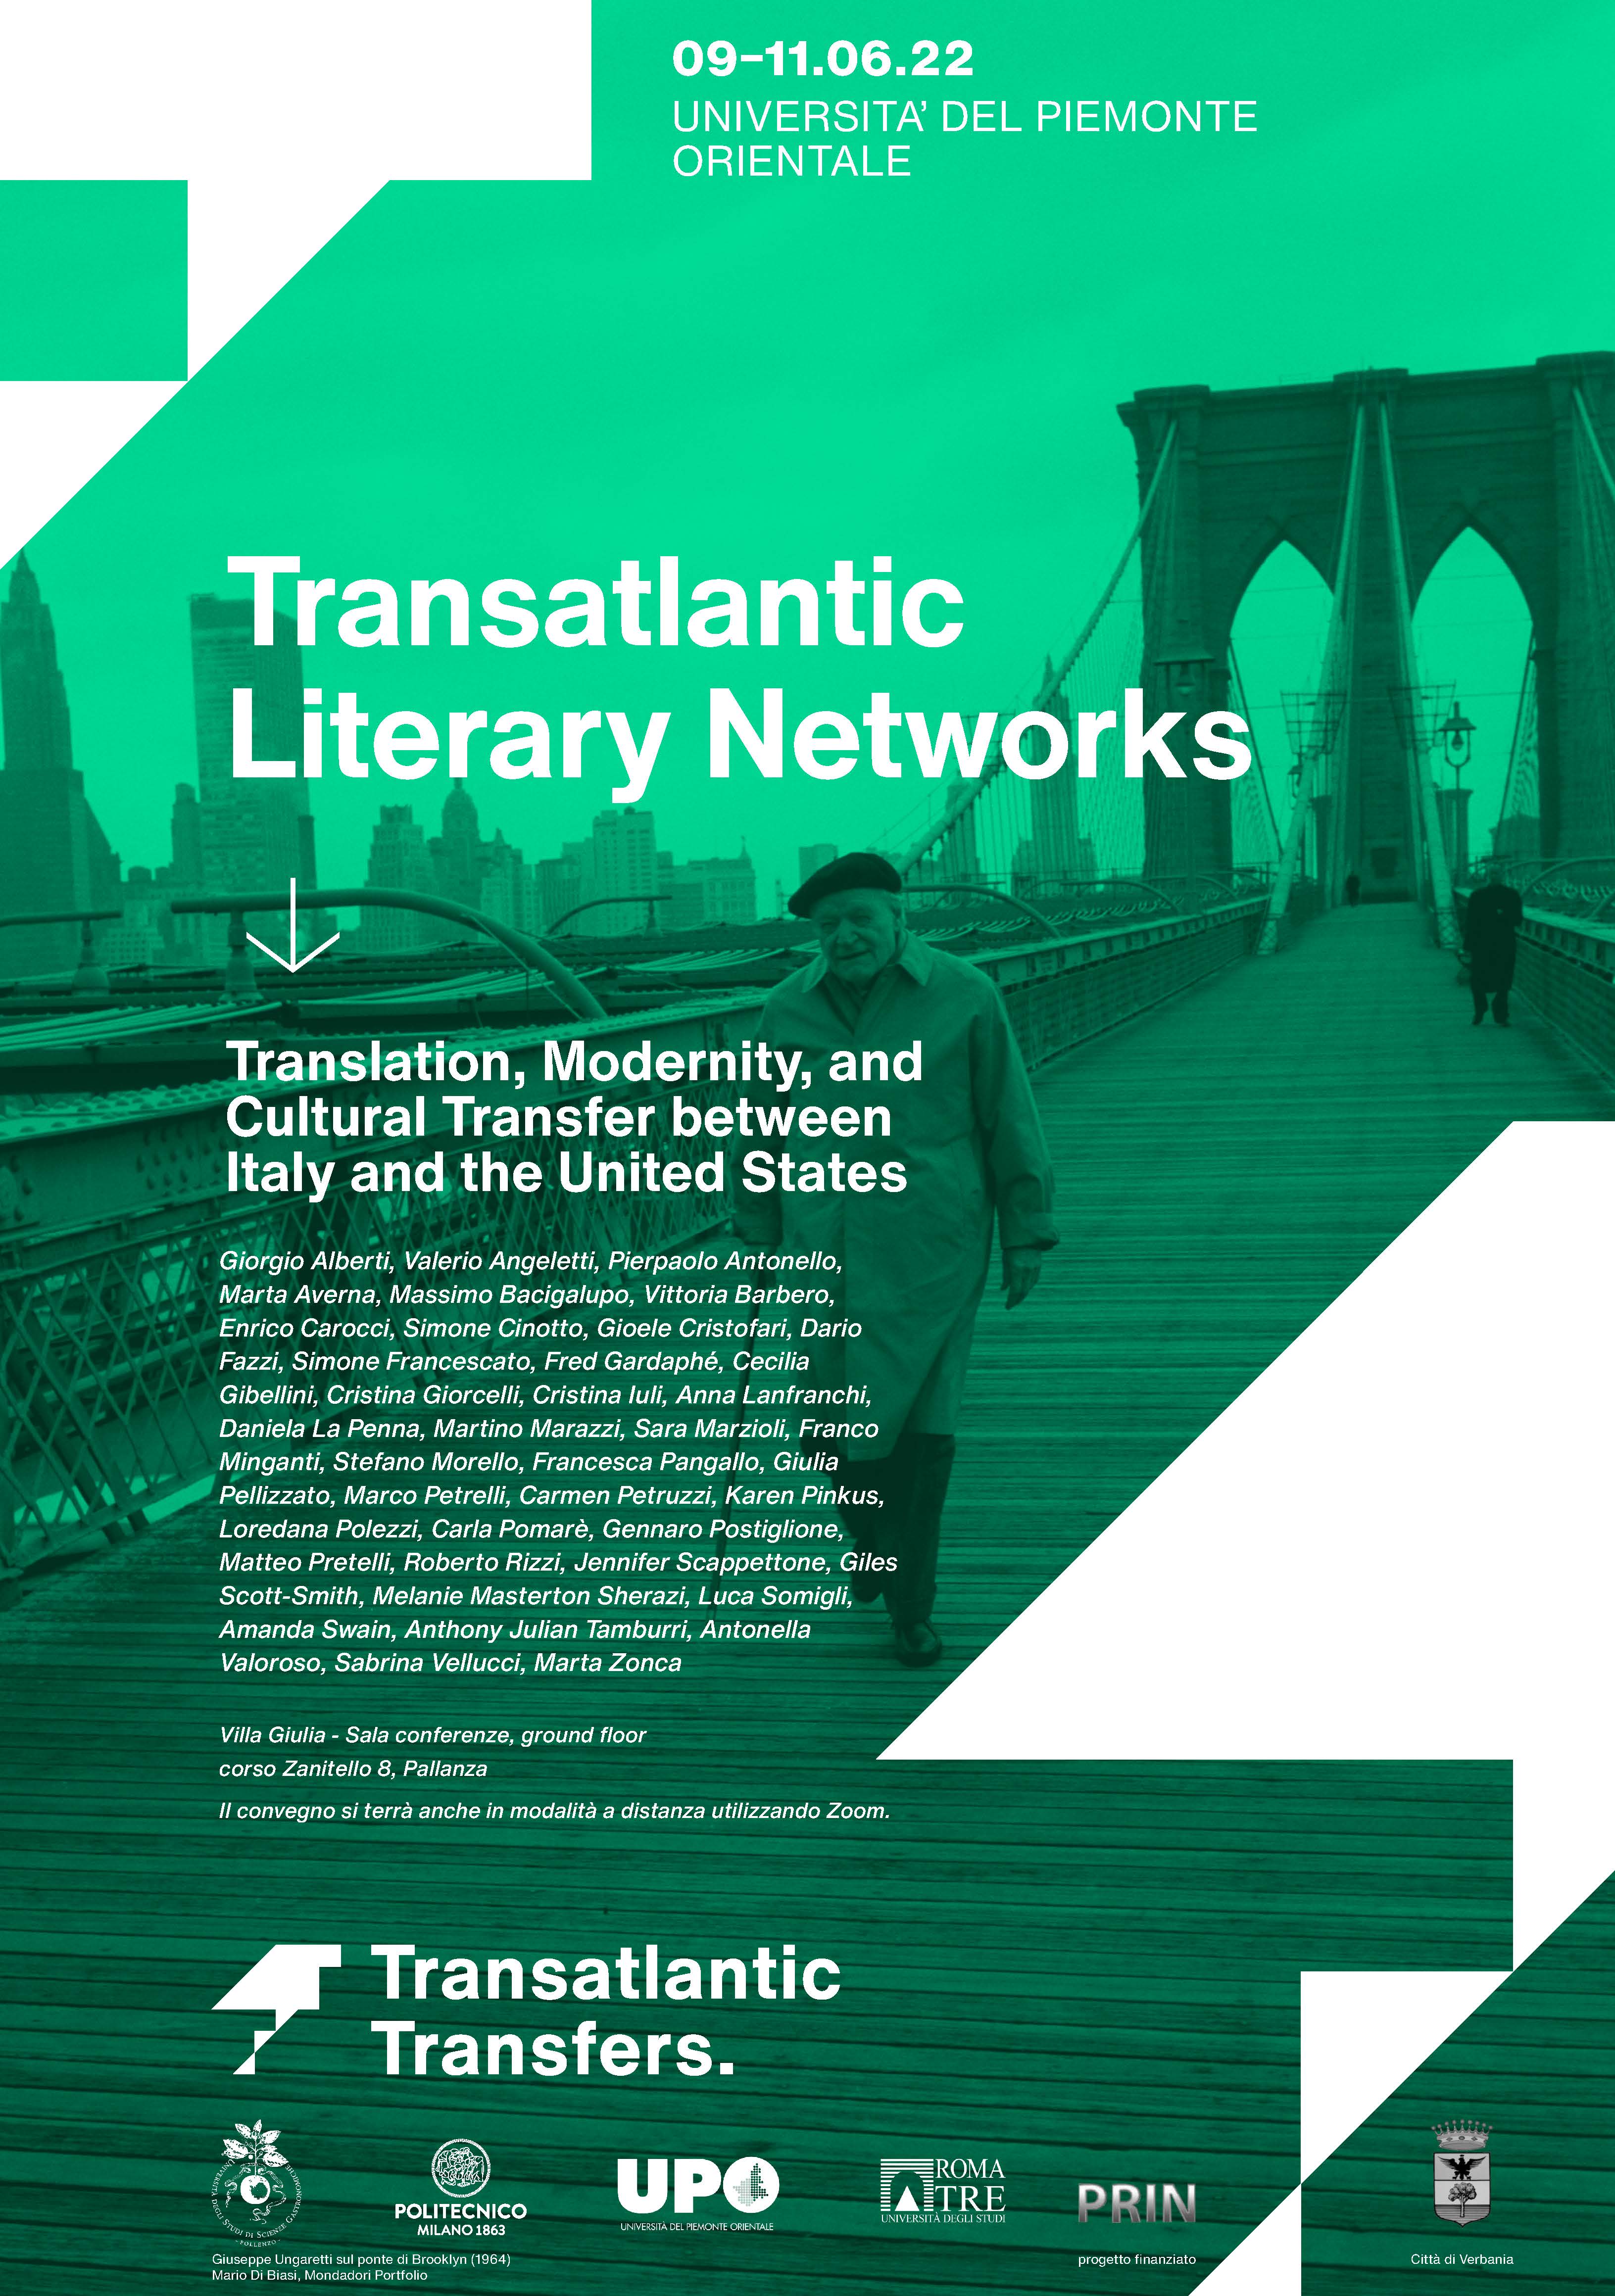 Transatlantic literary networks 1949-1972. Translation, modernity, and cultural transfer between Italy and the United States